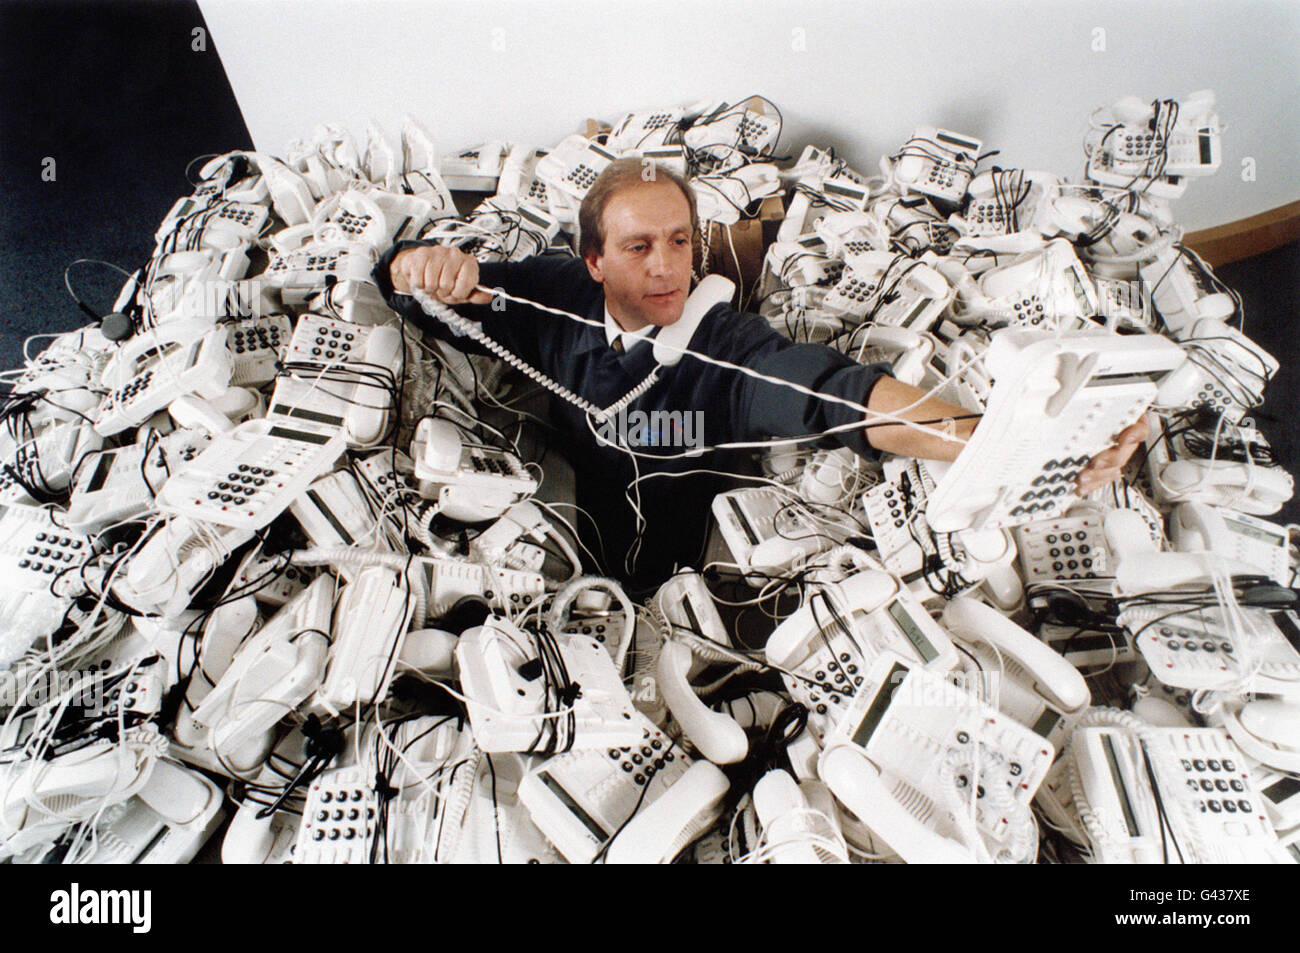 Engineer Alan Dillon has a few crossed wires as hundreds of telephones arrive at the BT Tower in London, ready for the annual Children In Need Appeal on Friday (Nov 24). The Tower is nerve-centre for the appeal, dealing last year with 300,000 calls from people wanting to pledge money. Stock Photo